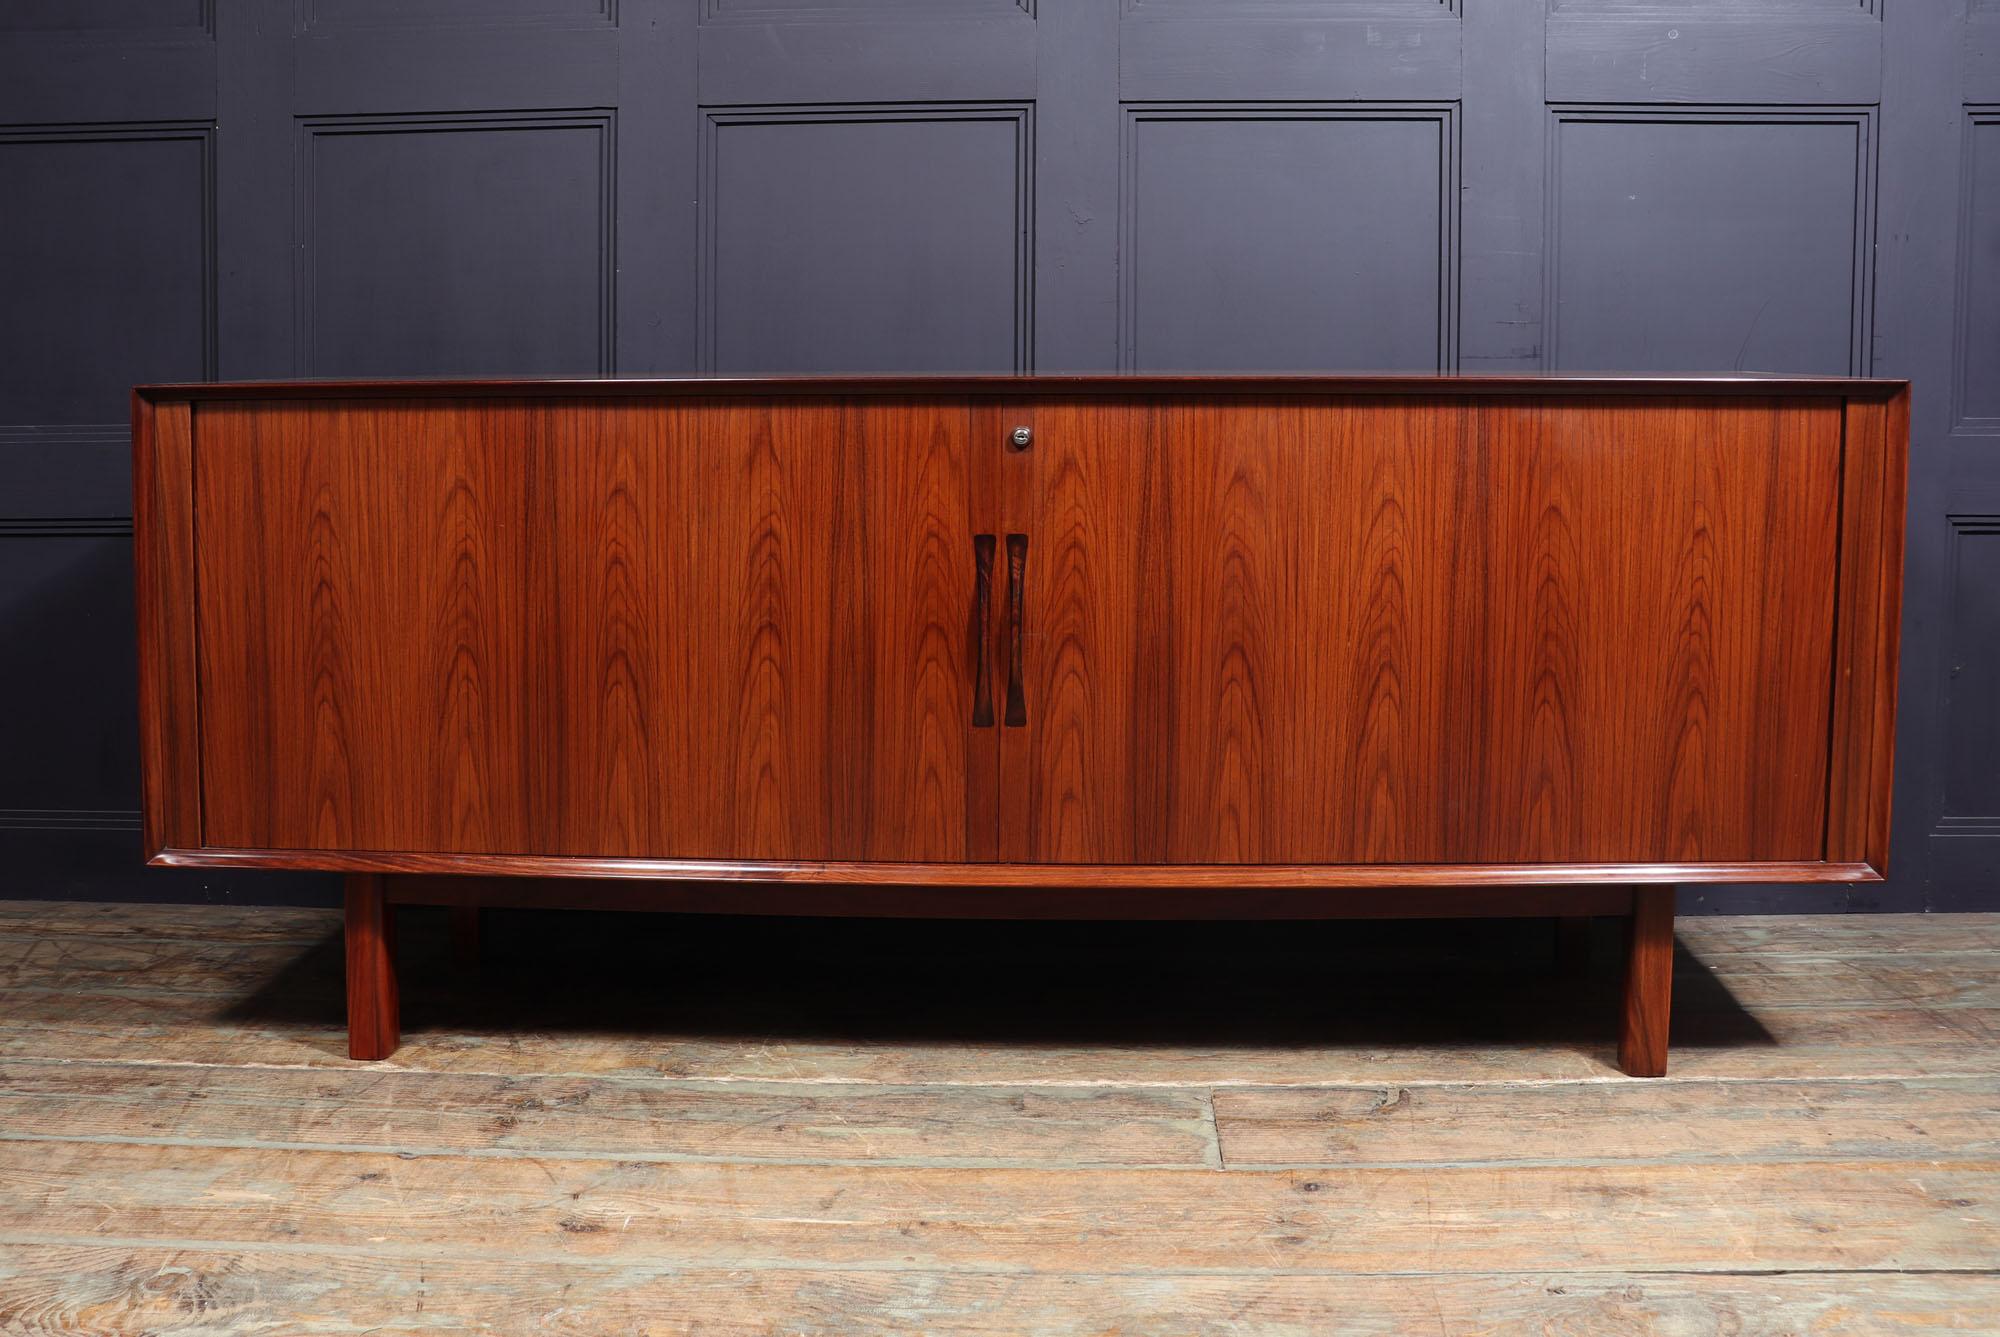 Tambour door sideboard by Arne Vodder.
A midcentury Danish sideboard designed by Arne Vodder and produced in Rosewood by Sibast in the 1970s. It has two tambour sliding doors that fully open to reveal four compartments of adjustable shelves sliding